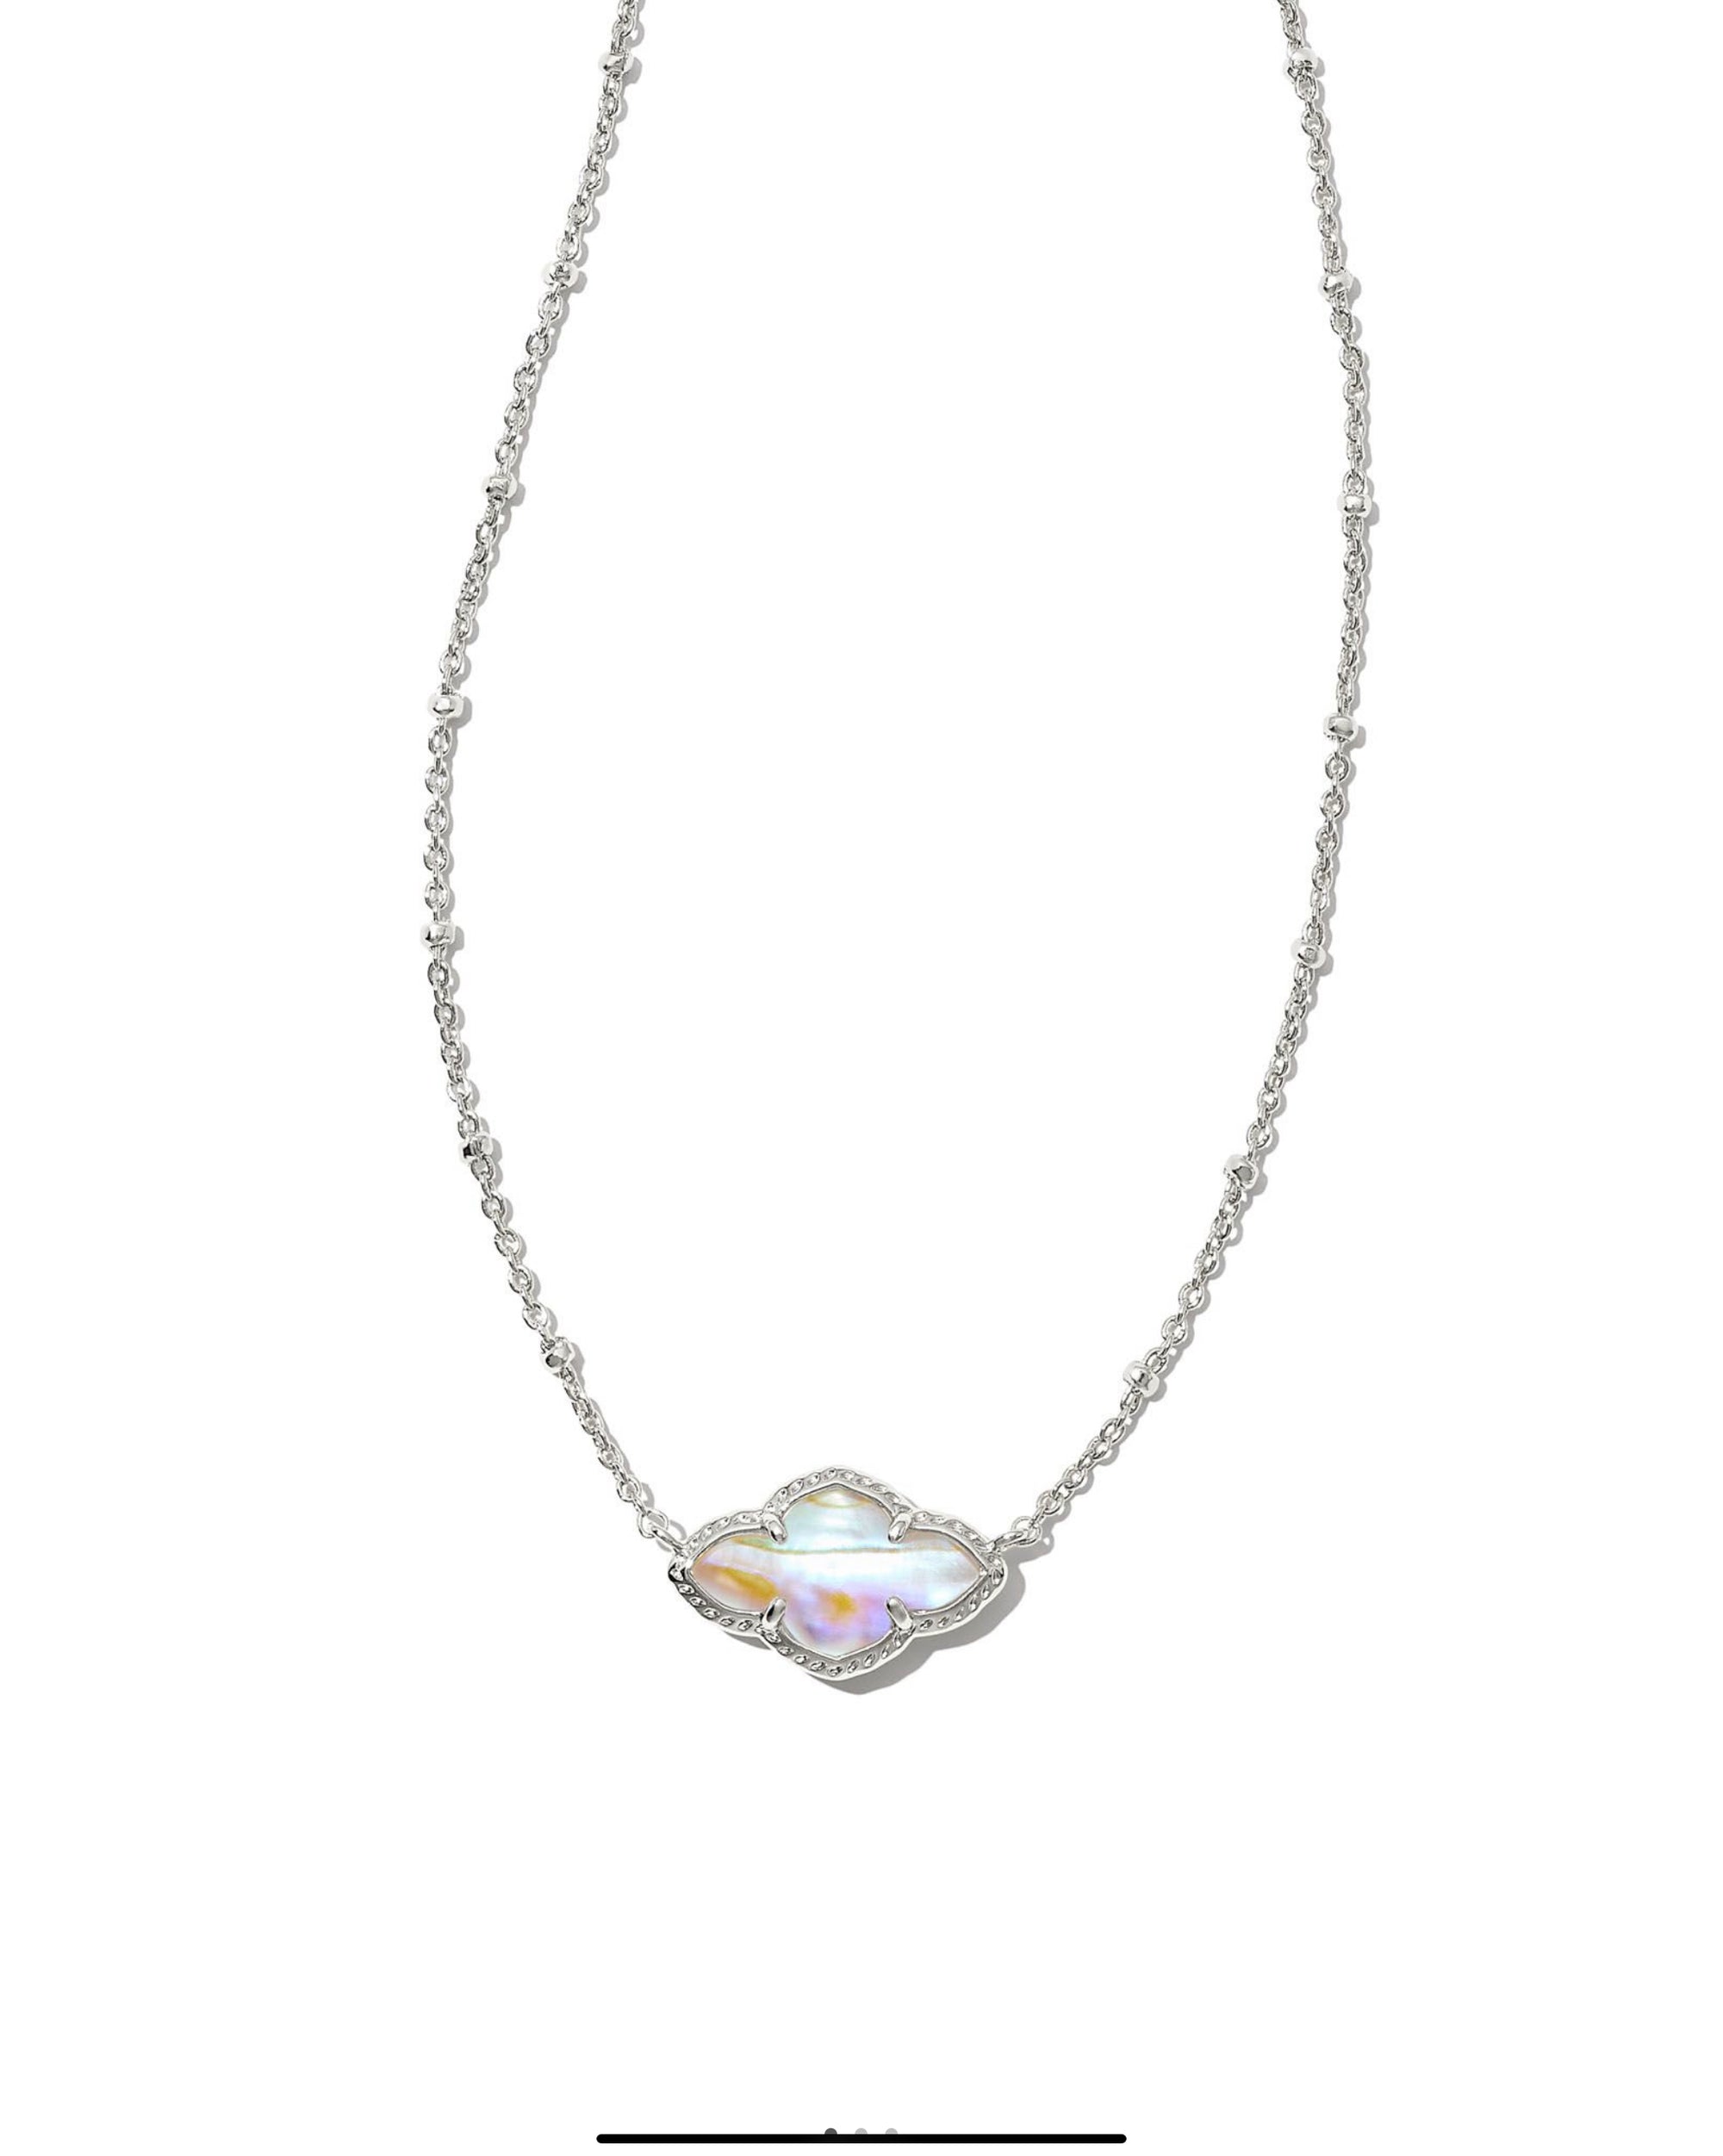 Abbie Silver Pendant Necklace Iridescent Abalone